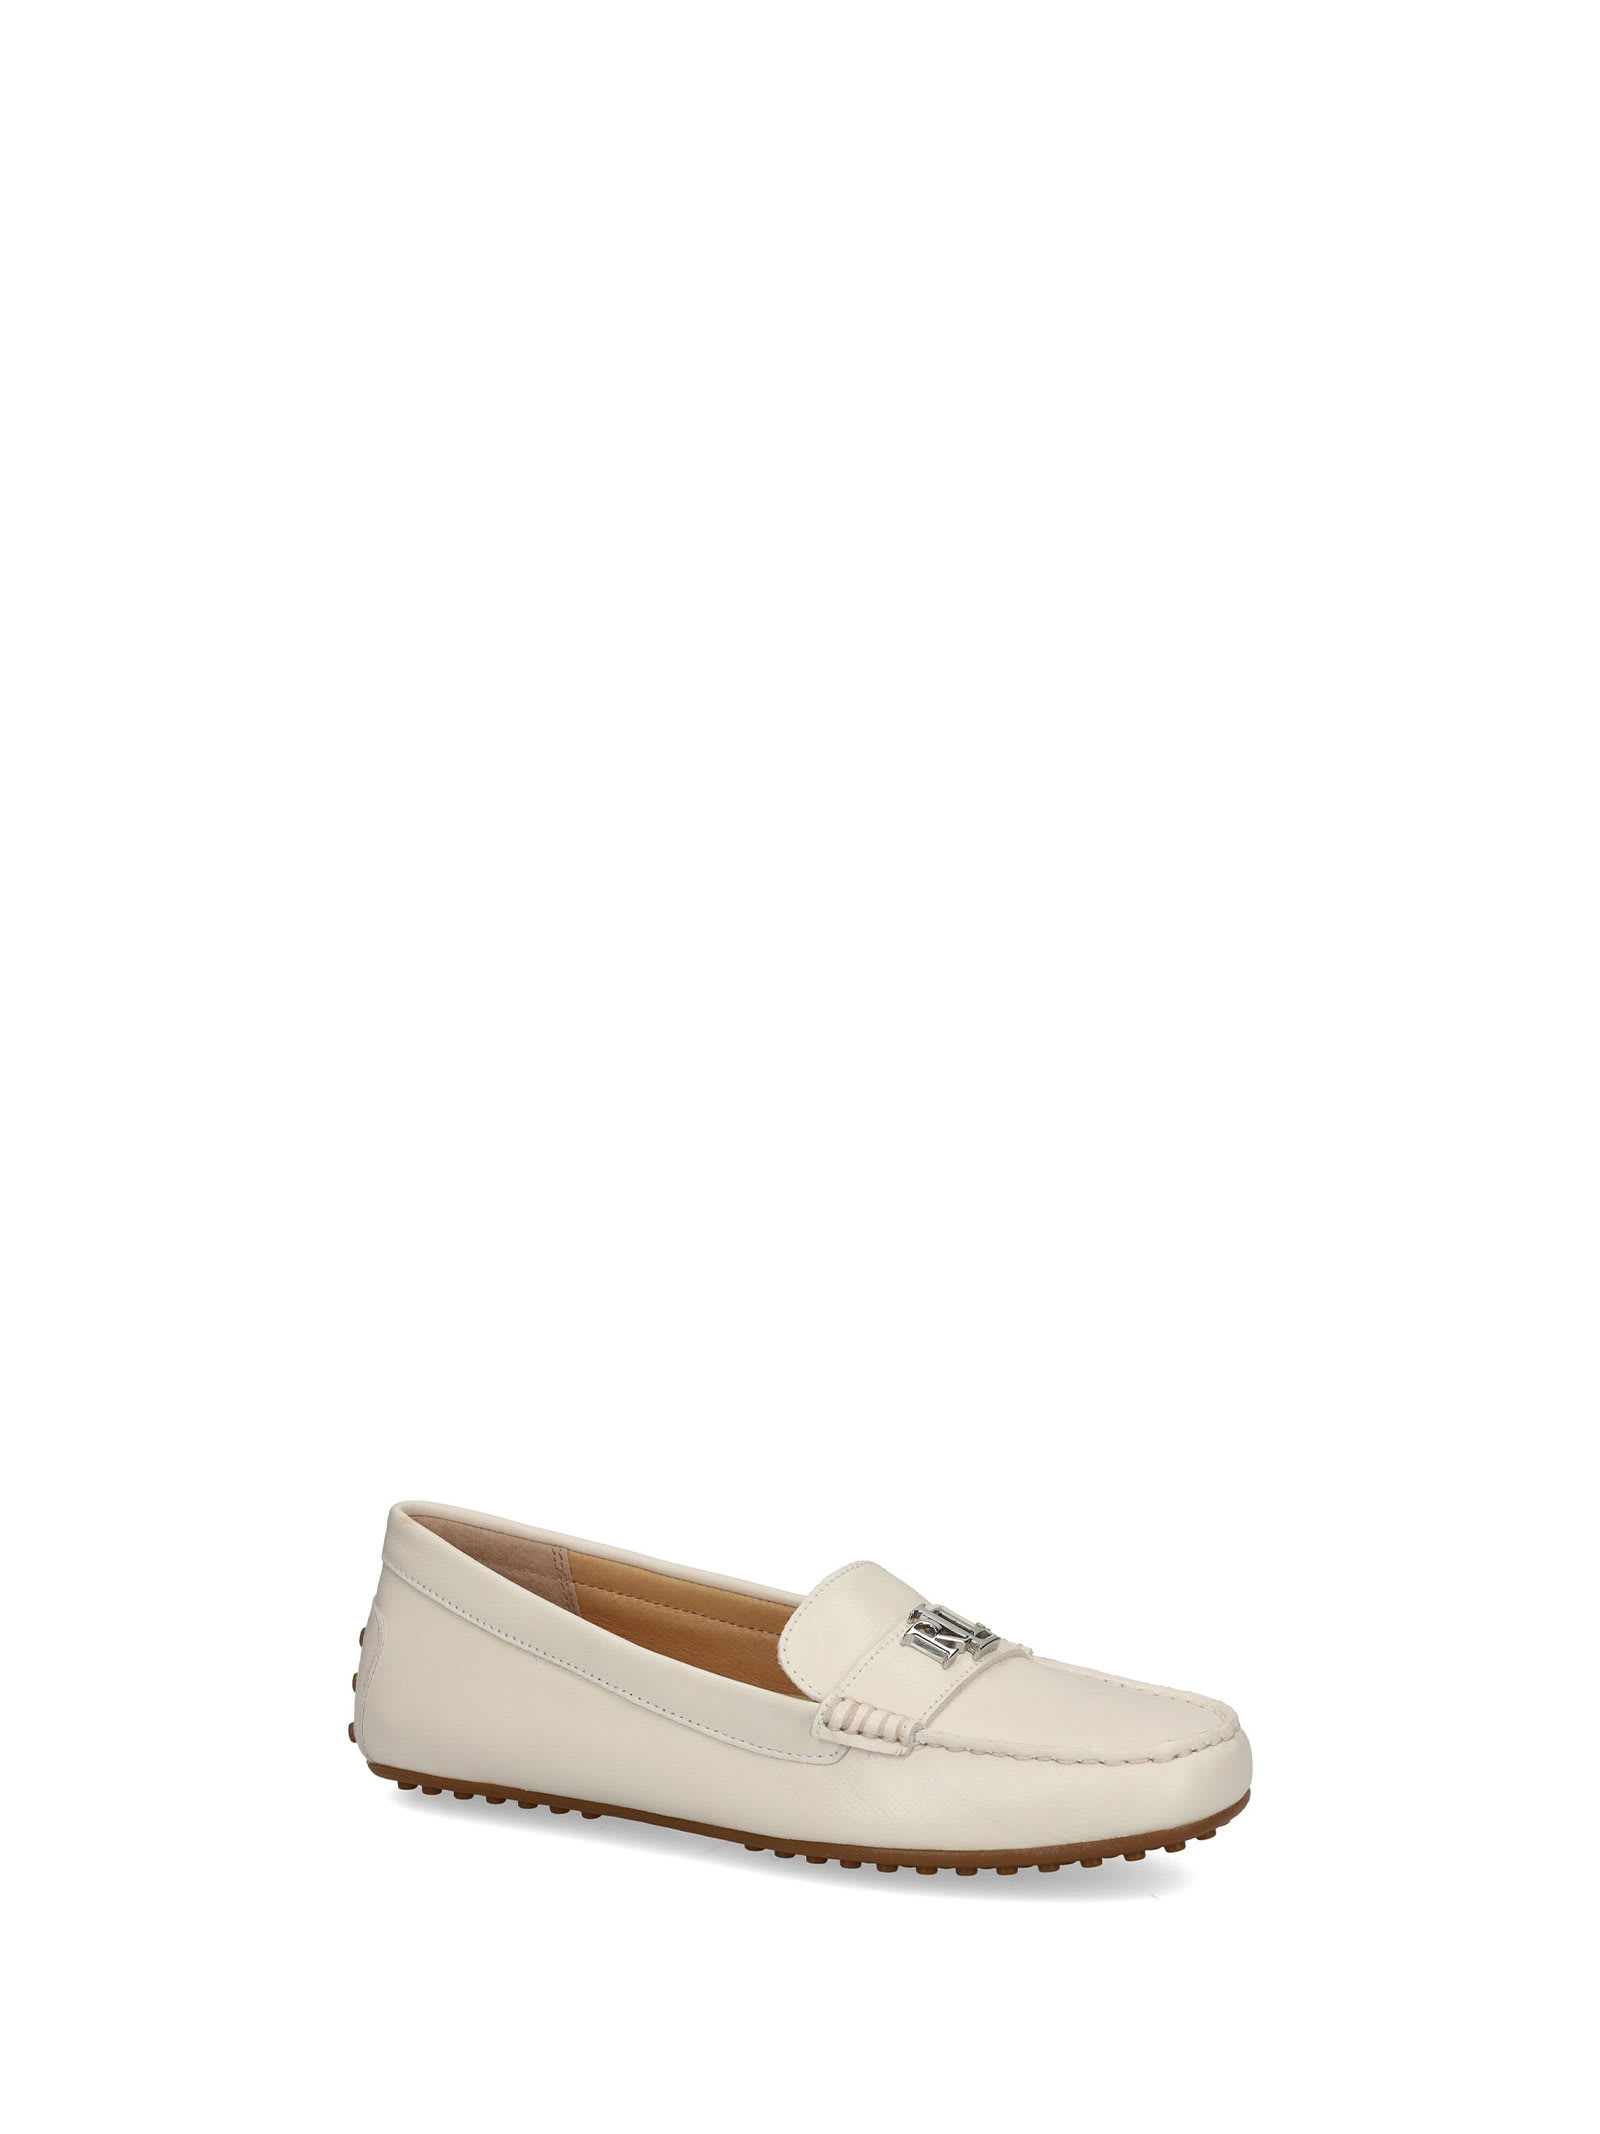 Shop Ralph Lauren Moccasin In Soft White Leather